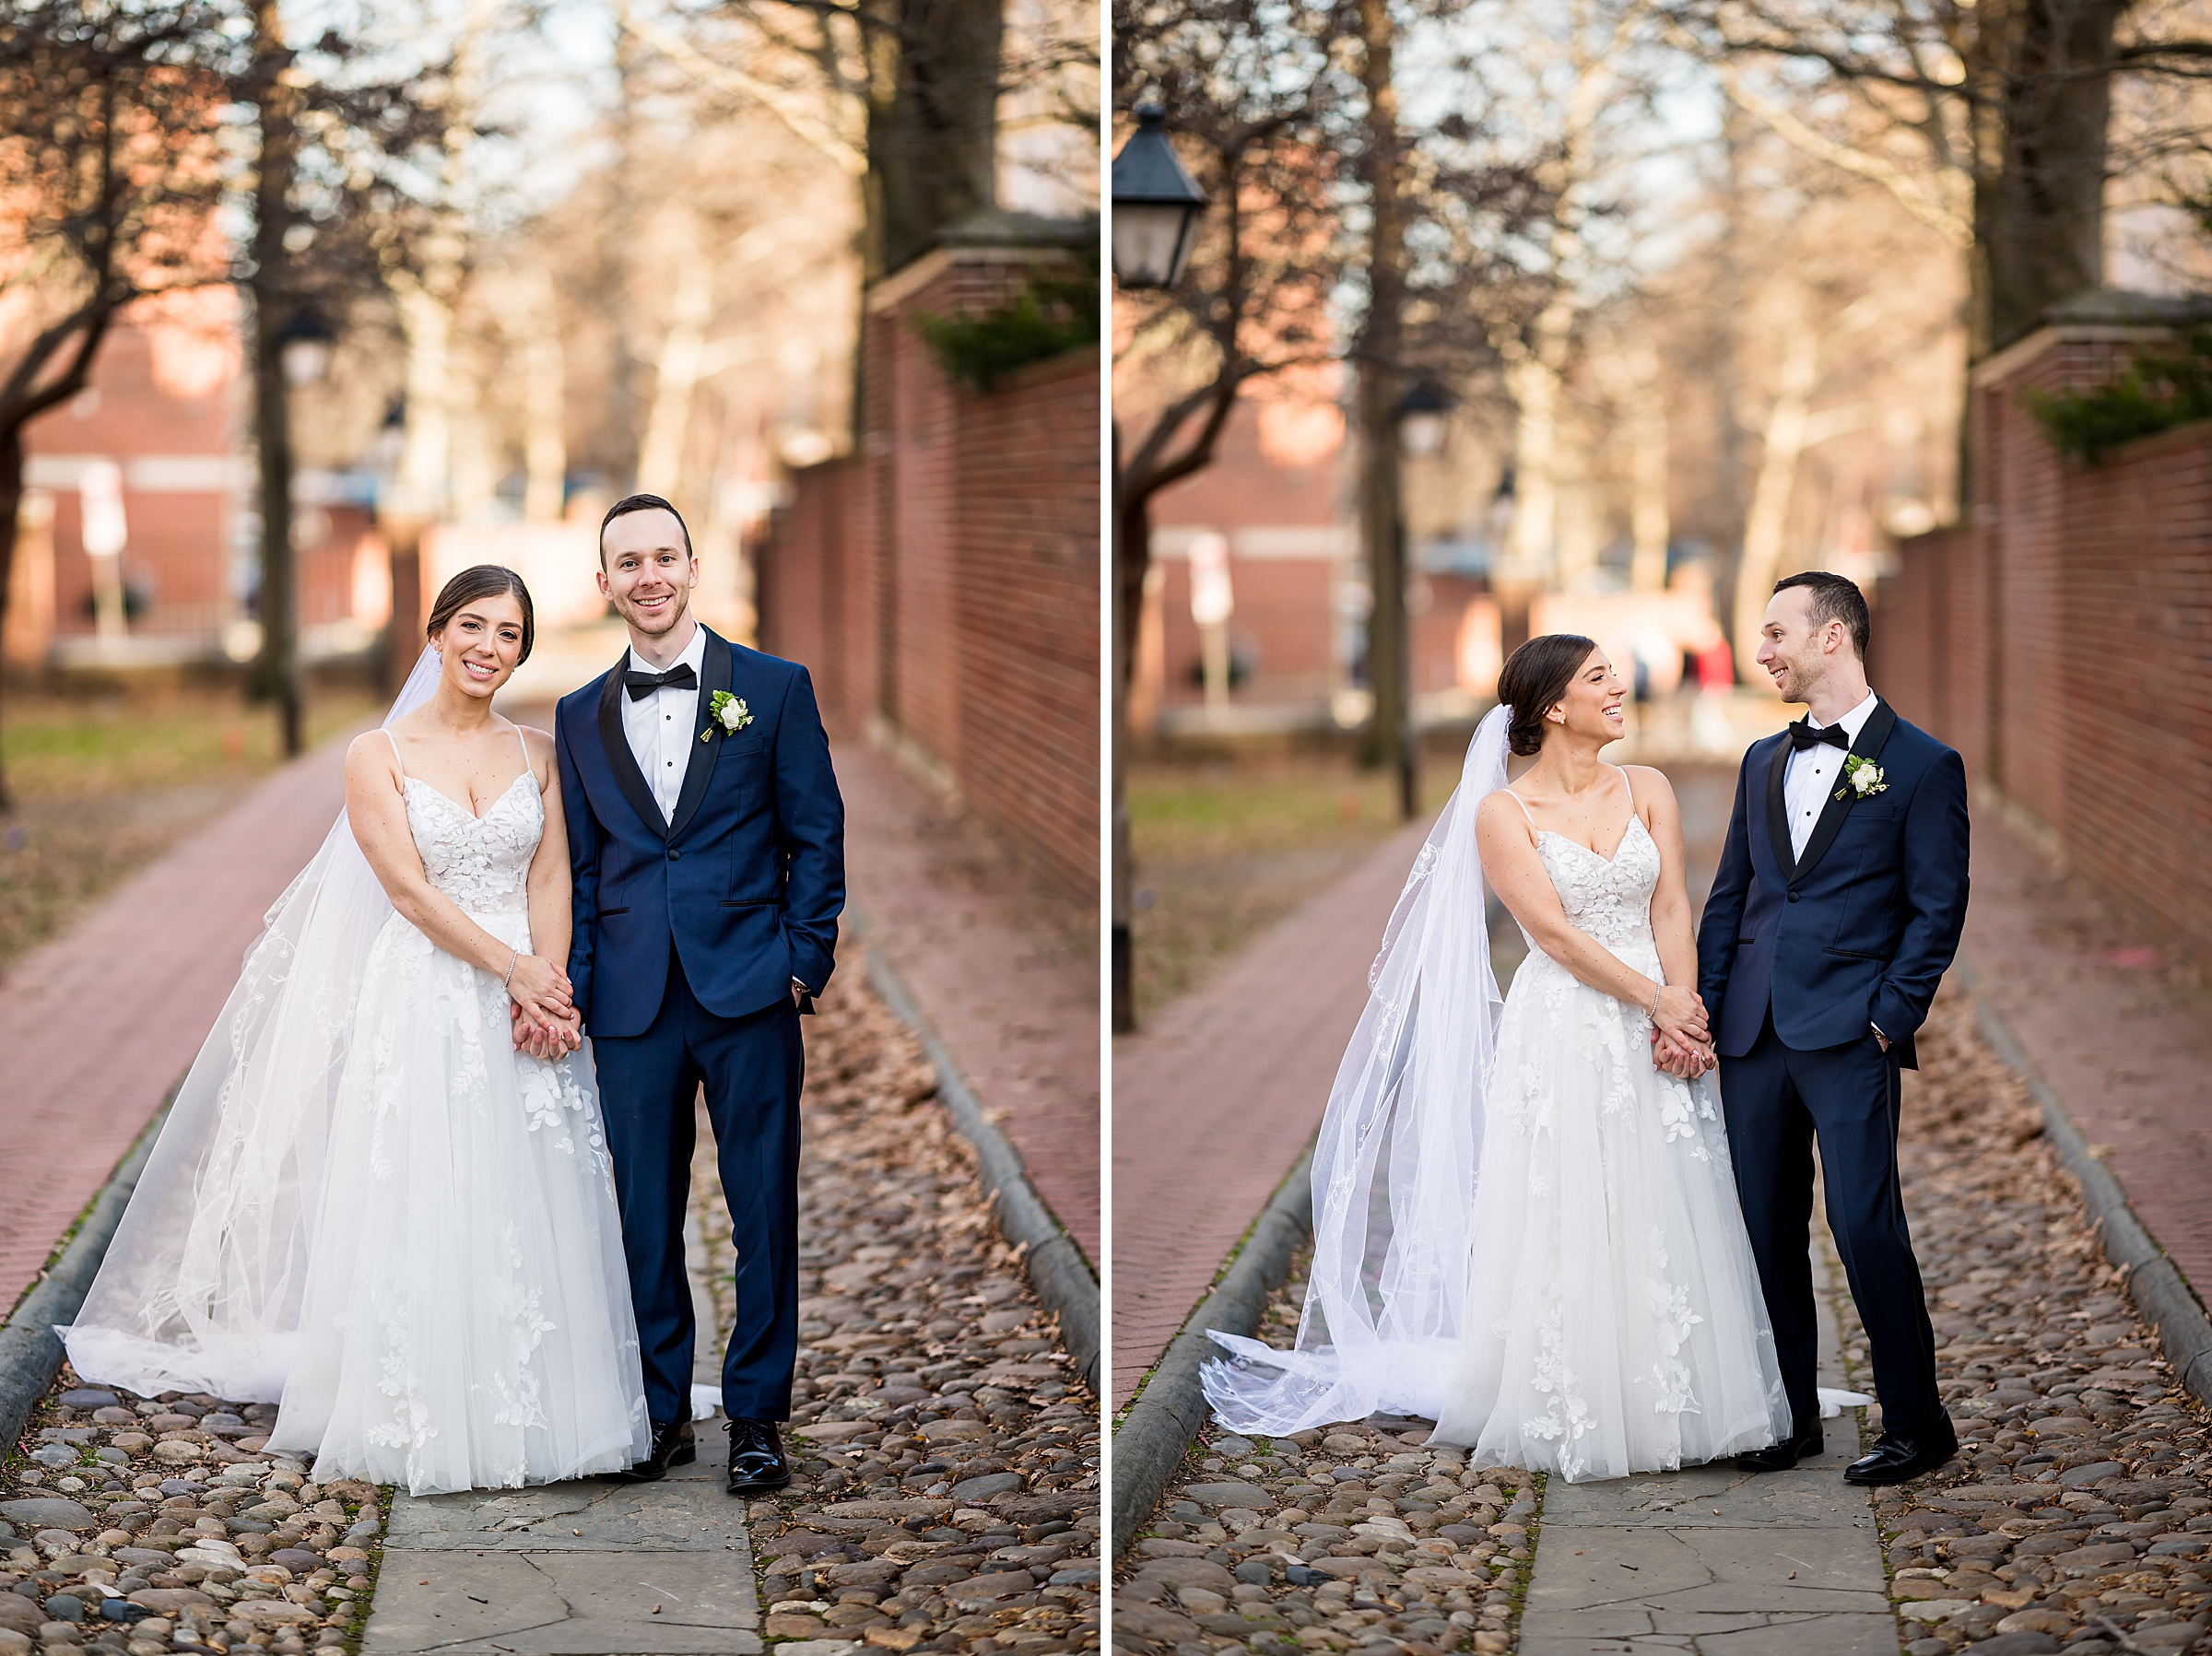 A bride and groom pose for a wedding photo on a cobblestone street.